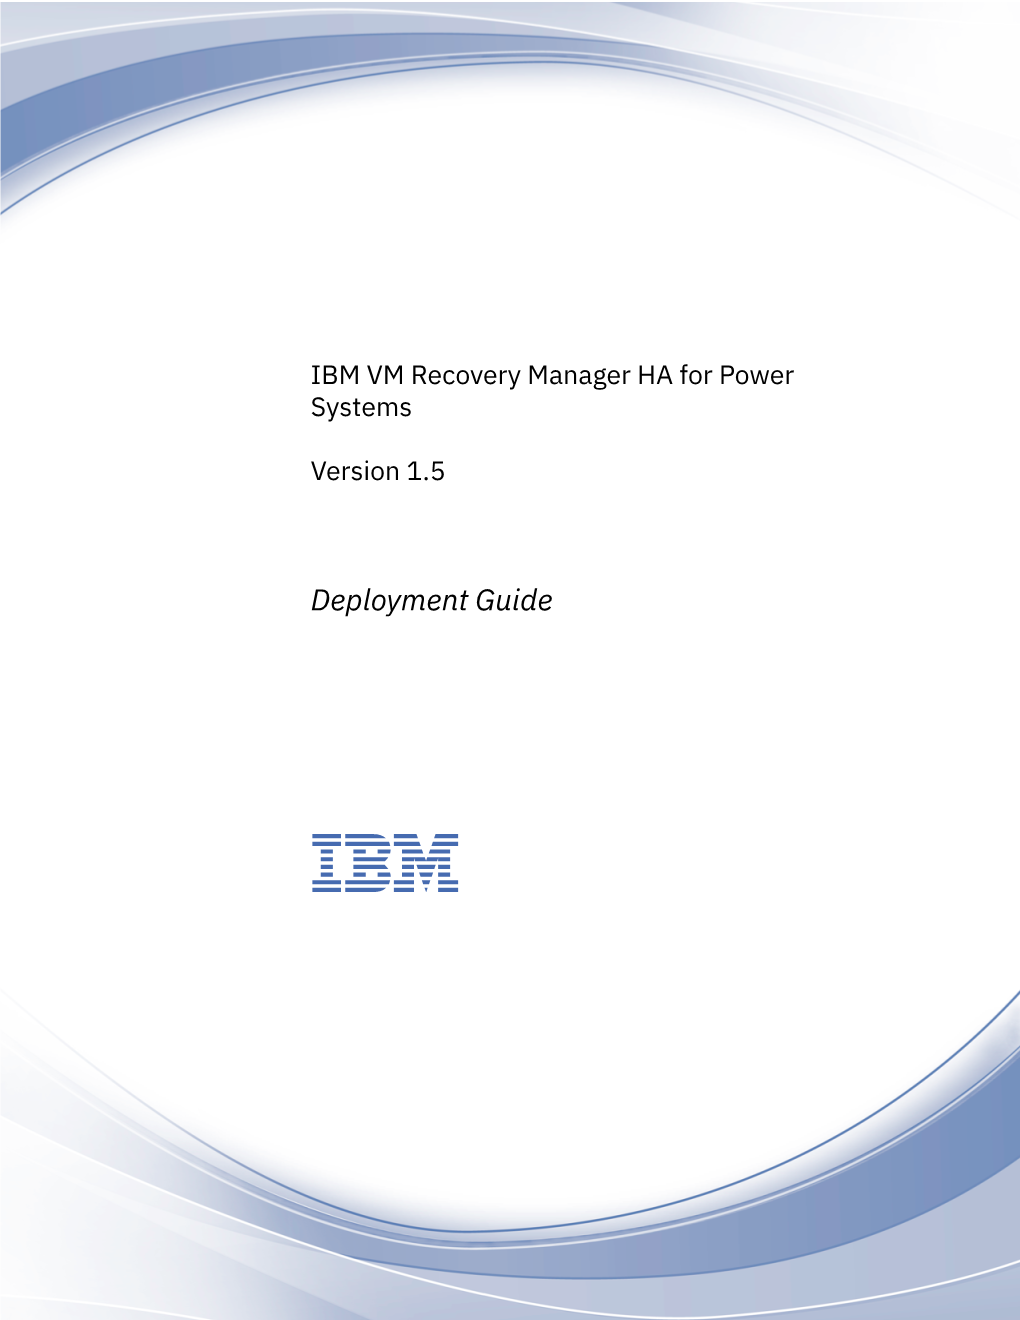 IBM VM Recovery Manager HA for Power Systems Version 1.5: Deployment Guide Frequently Asked Questions